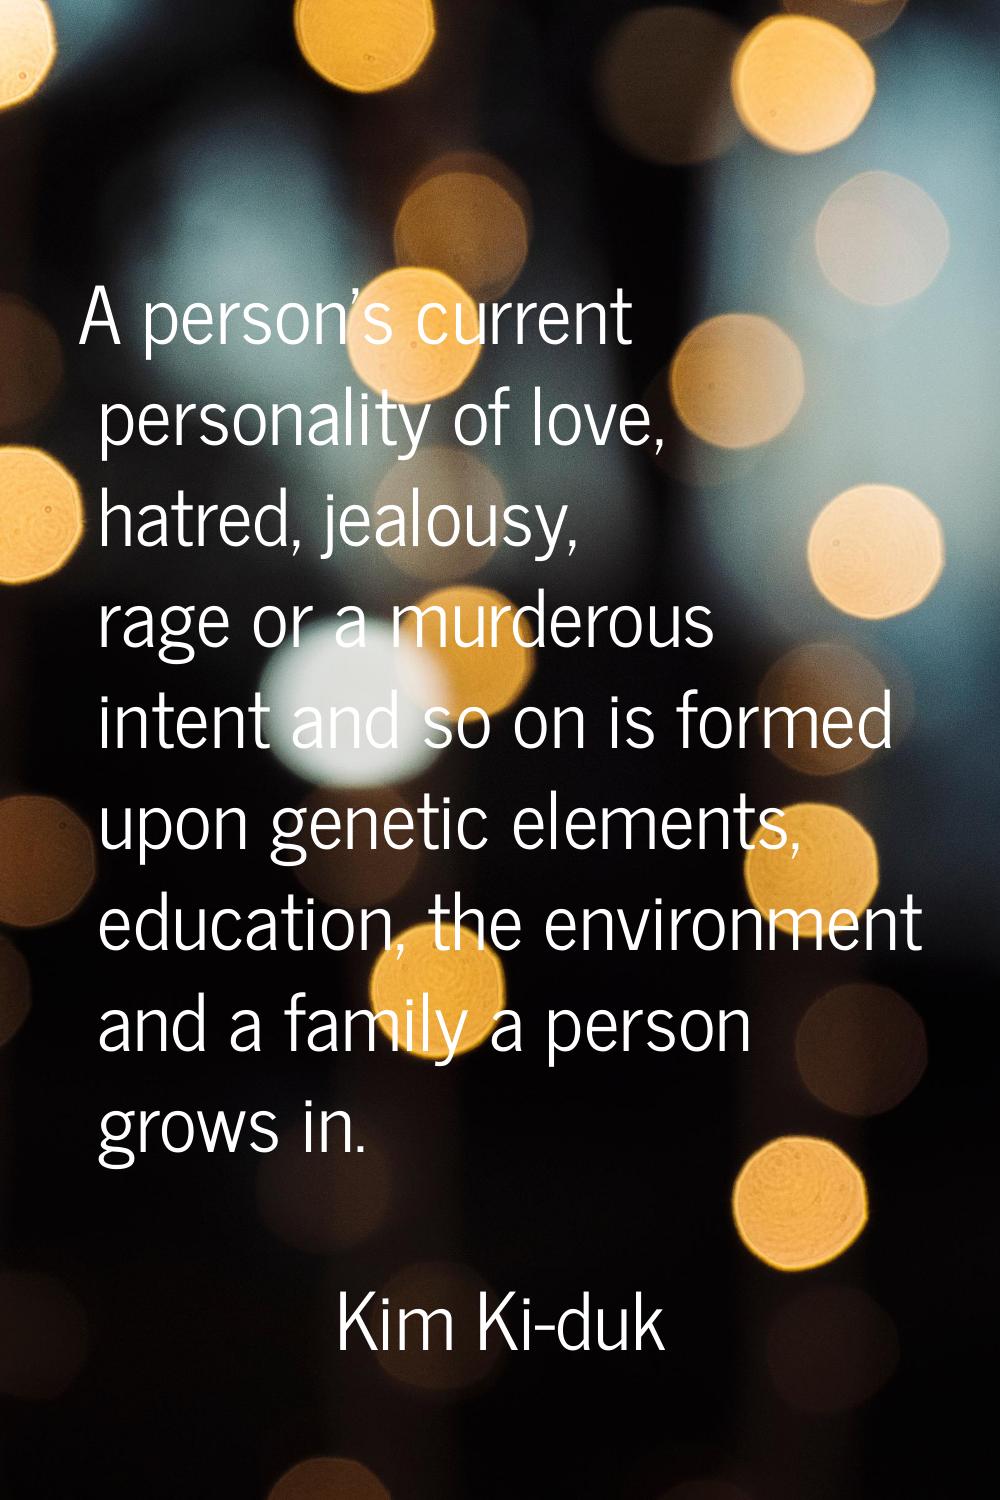 A person's current personality of love, hatred, jealousy, rage or a murderous intent and so on is f